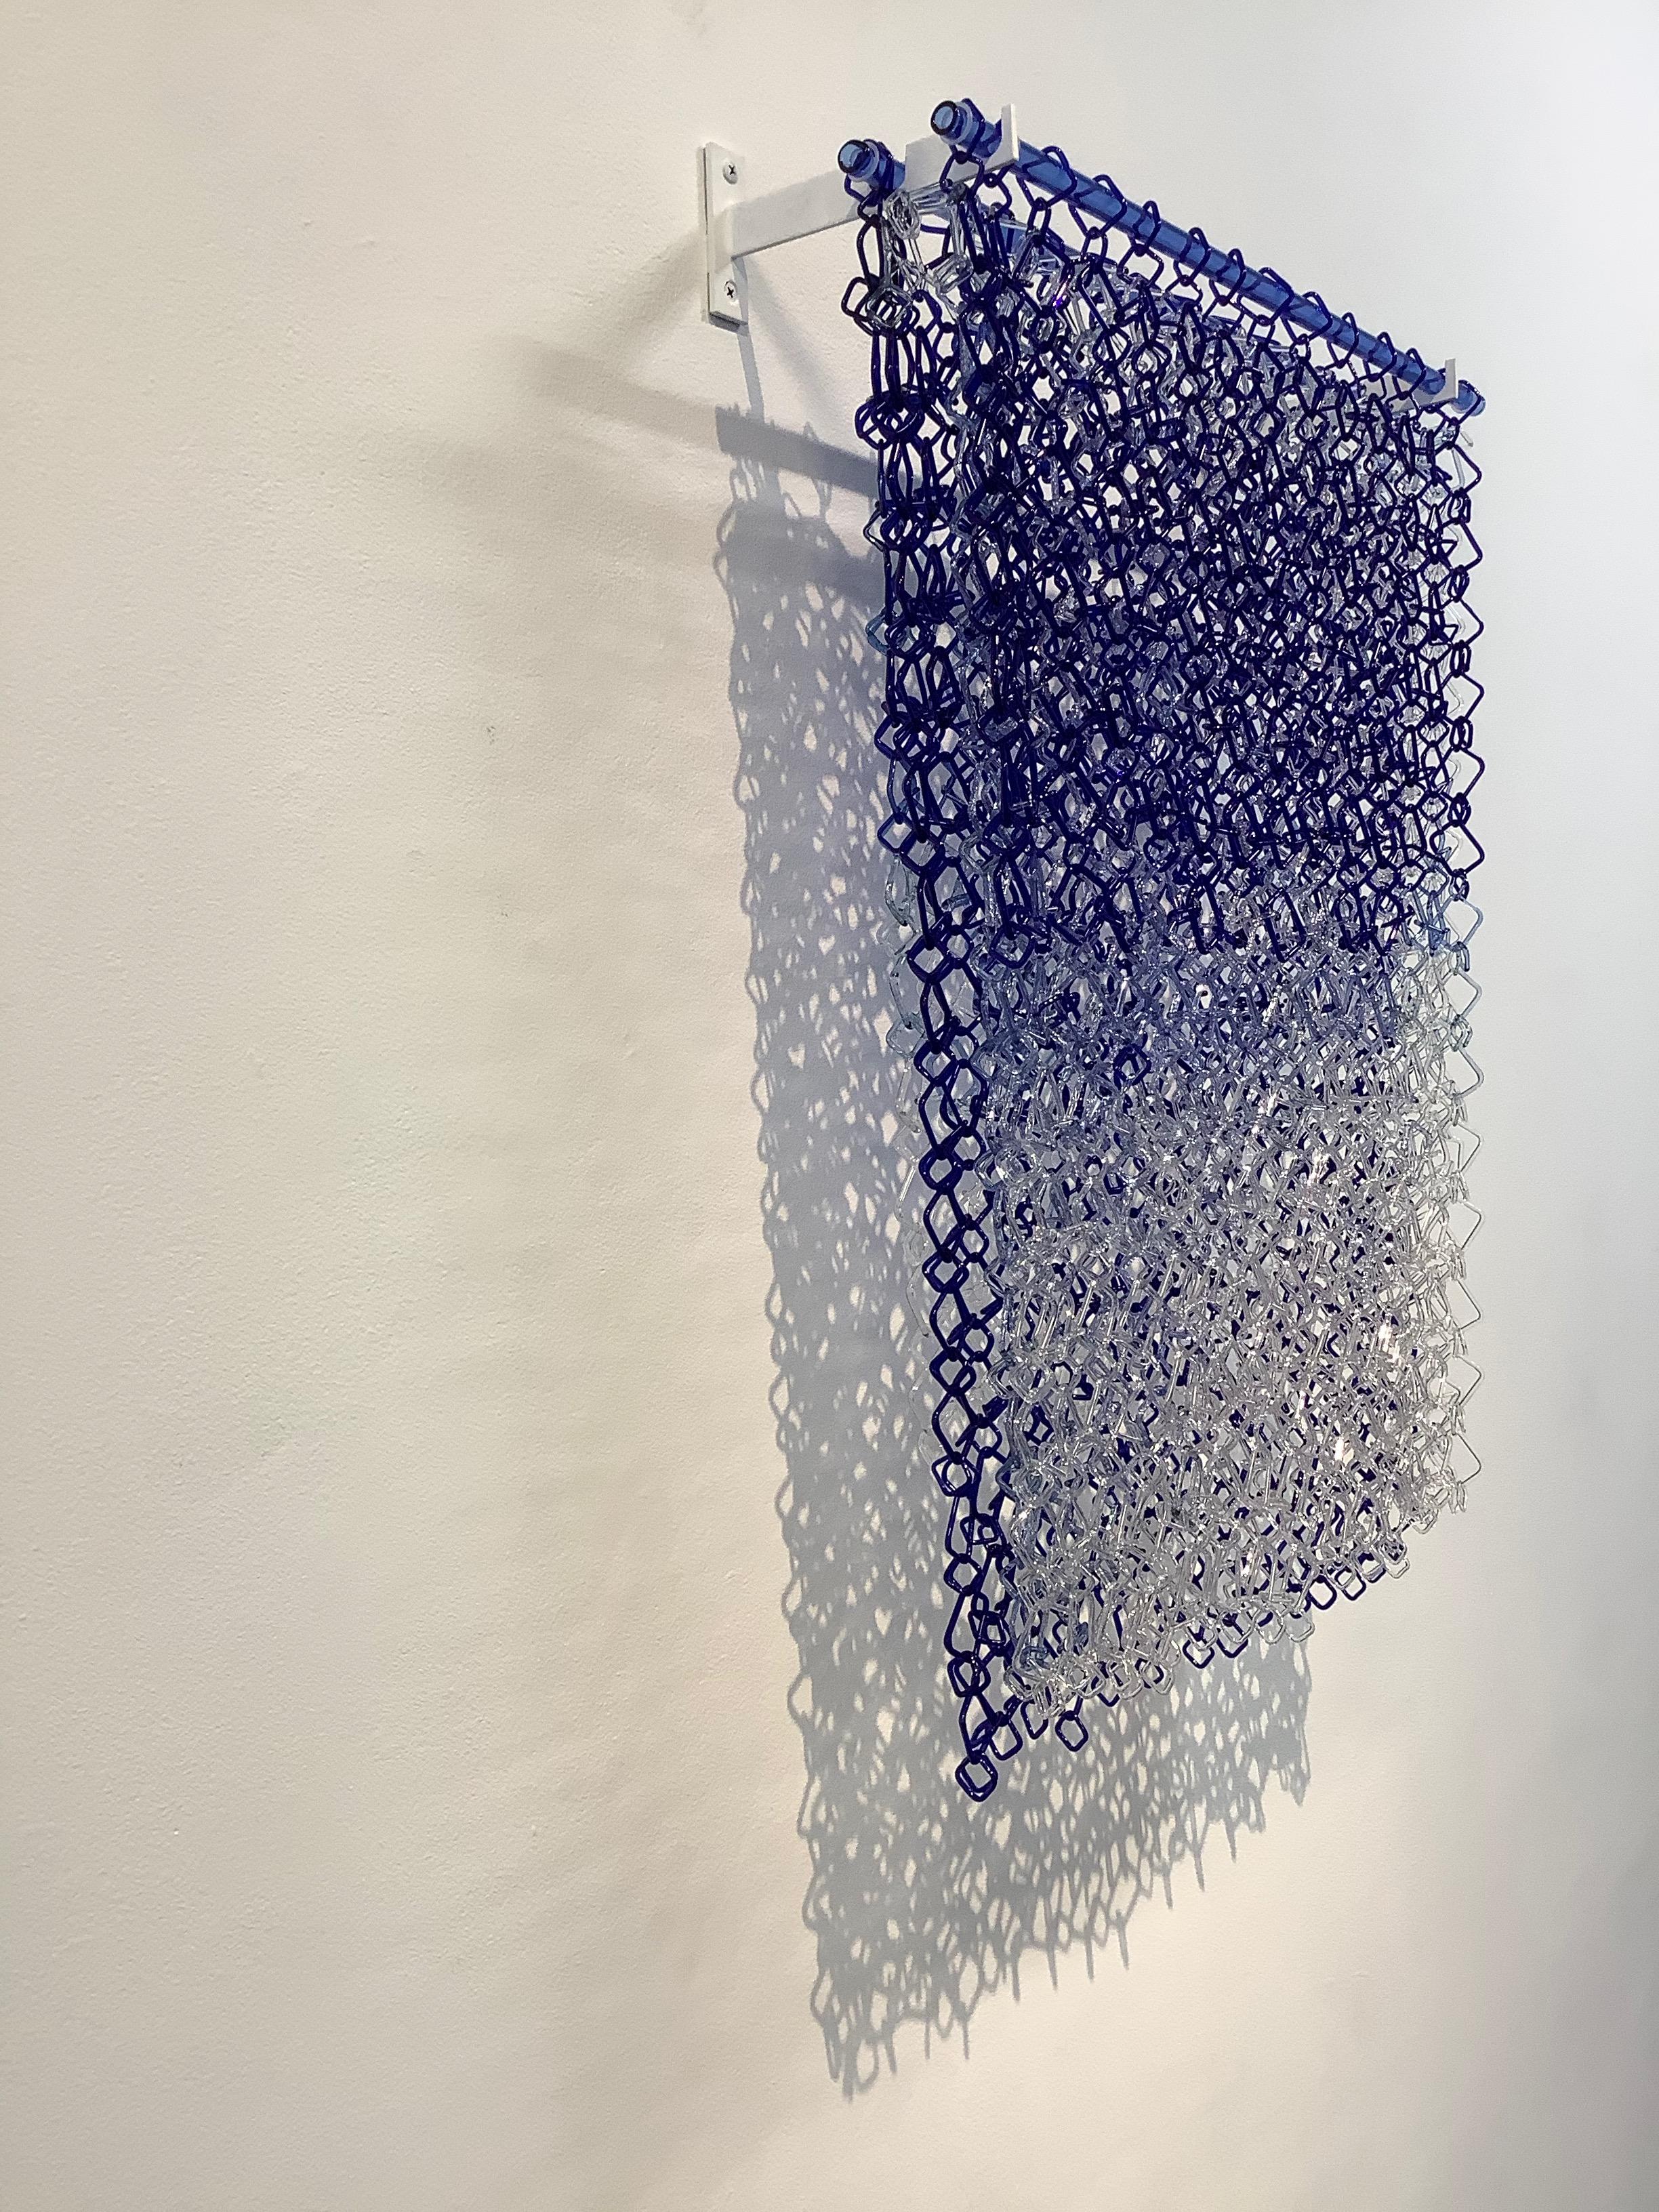 Low Tide, Hanging Sculpture, Blue, Violet Torch-Worked Glass Chain Maille Links - Gray Abstract Sculpture by David Licata